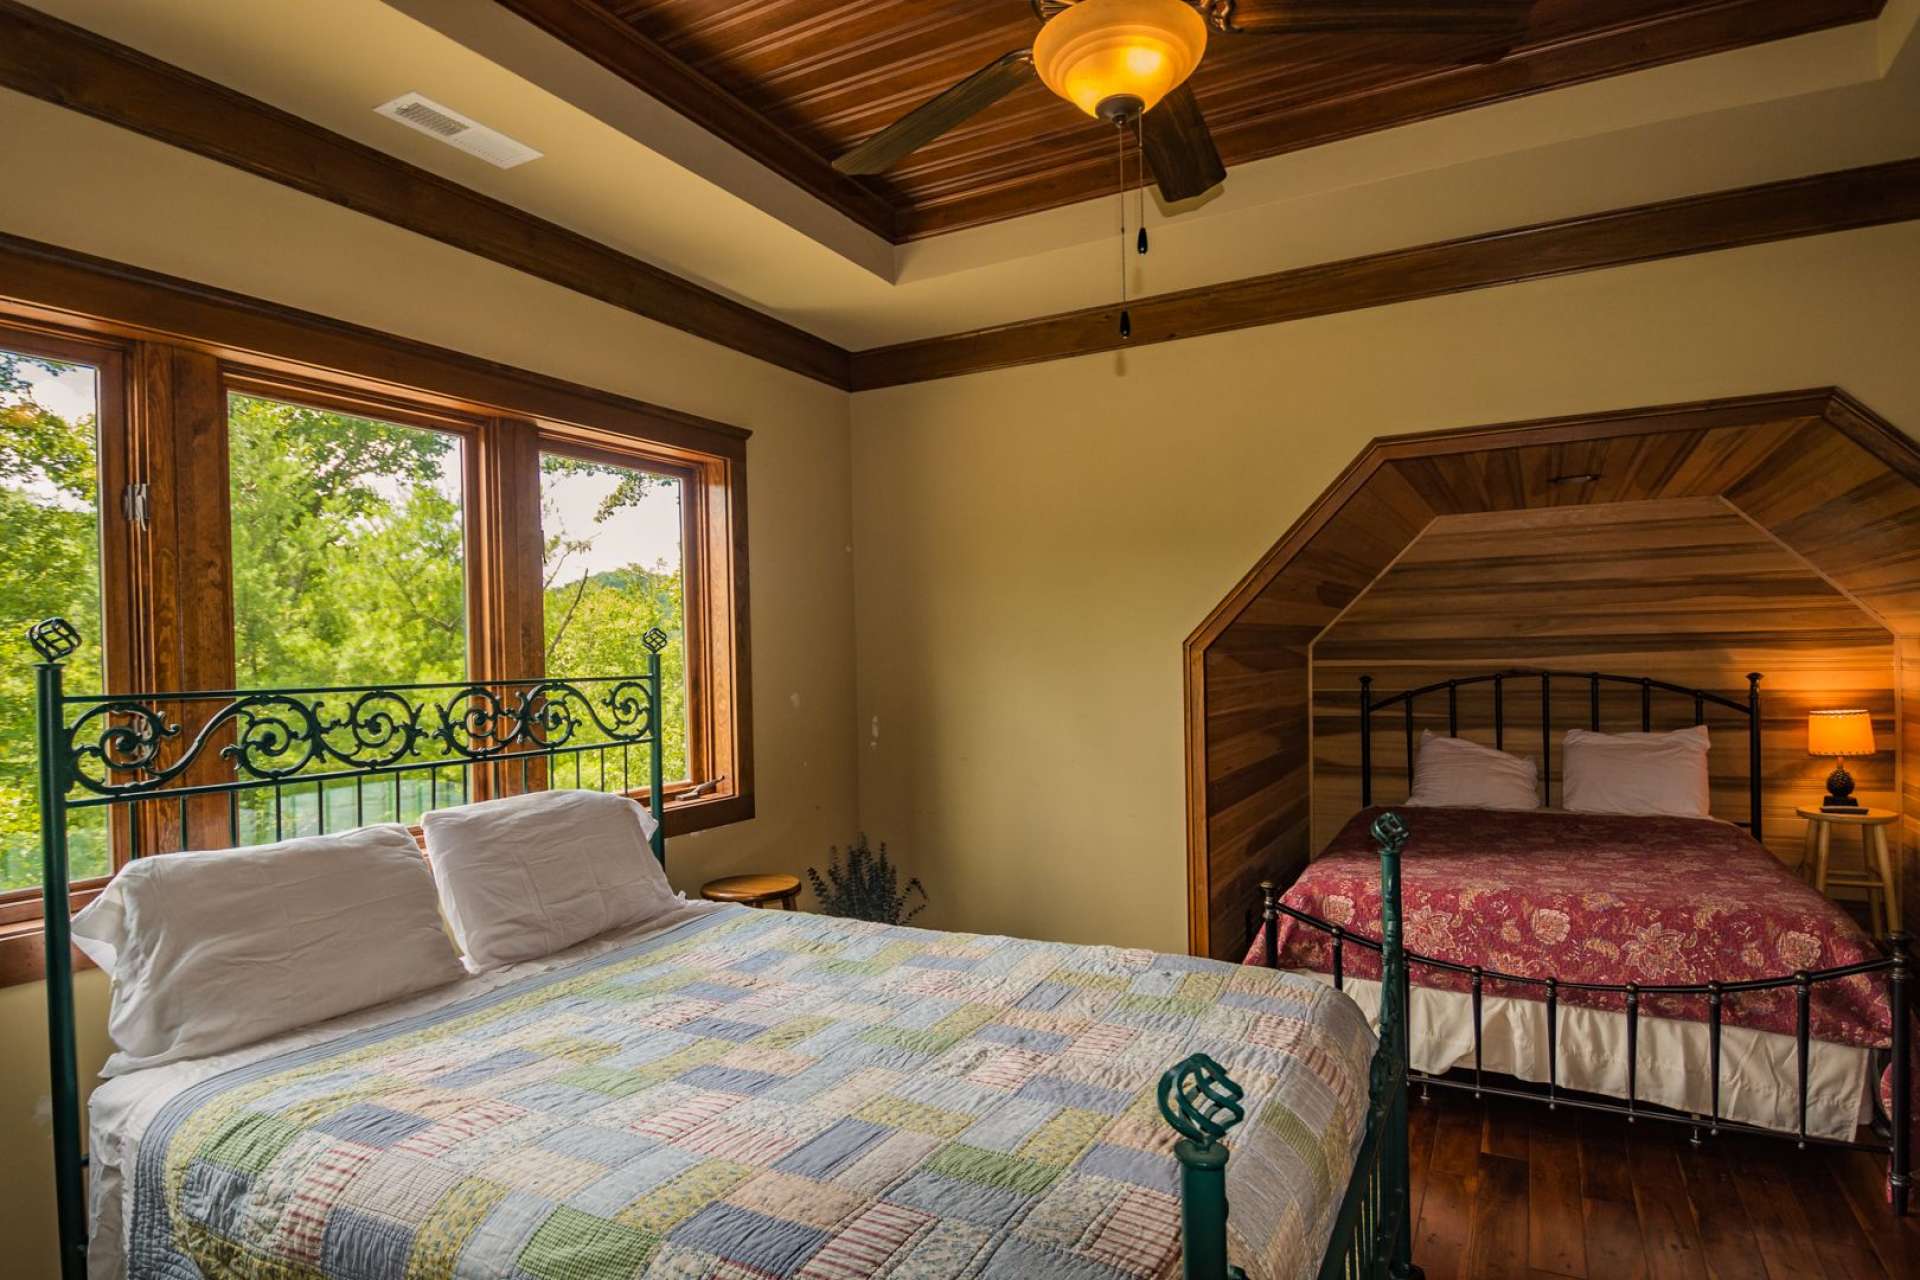 This upper level bedroom has an alcove for extra sleeping space. Notice the craftsman details in the ceilings.